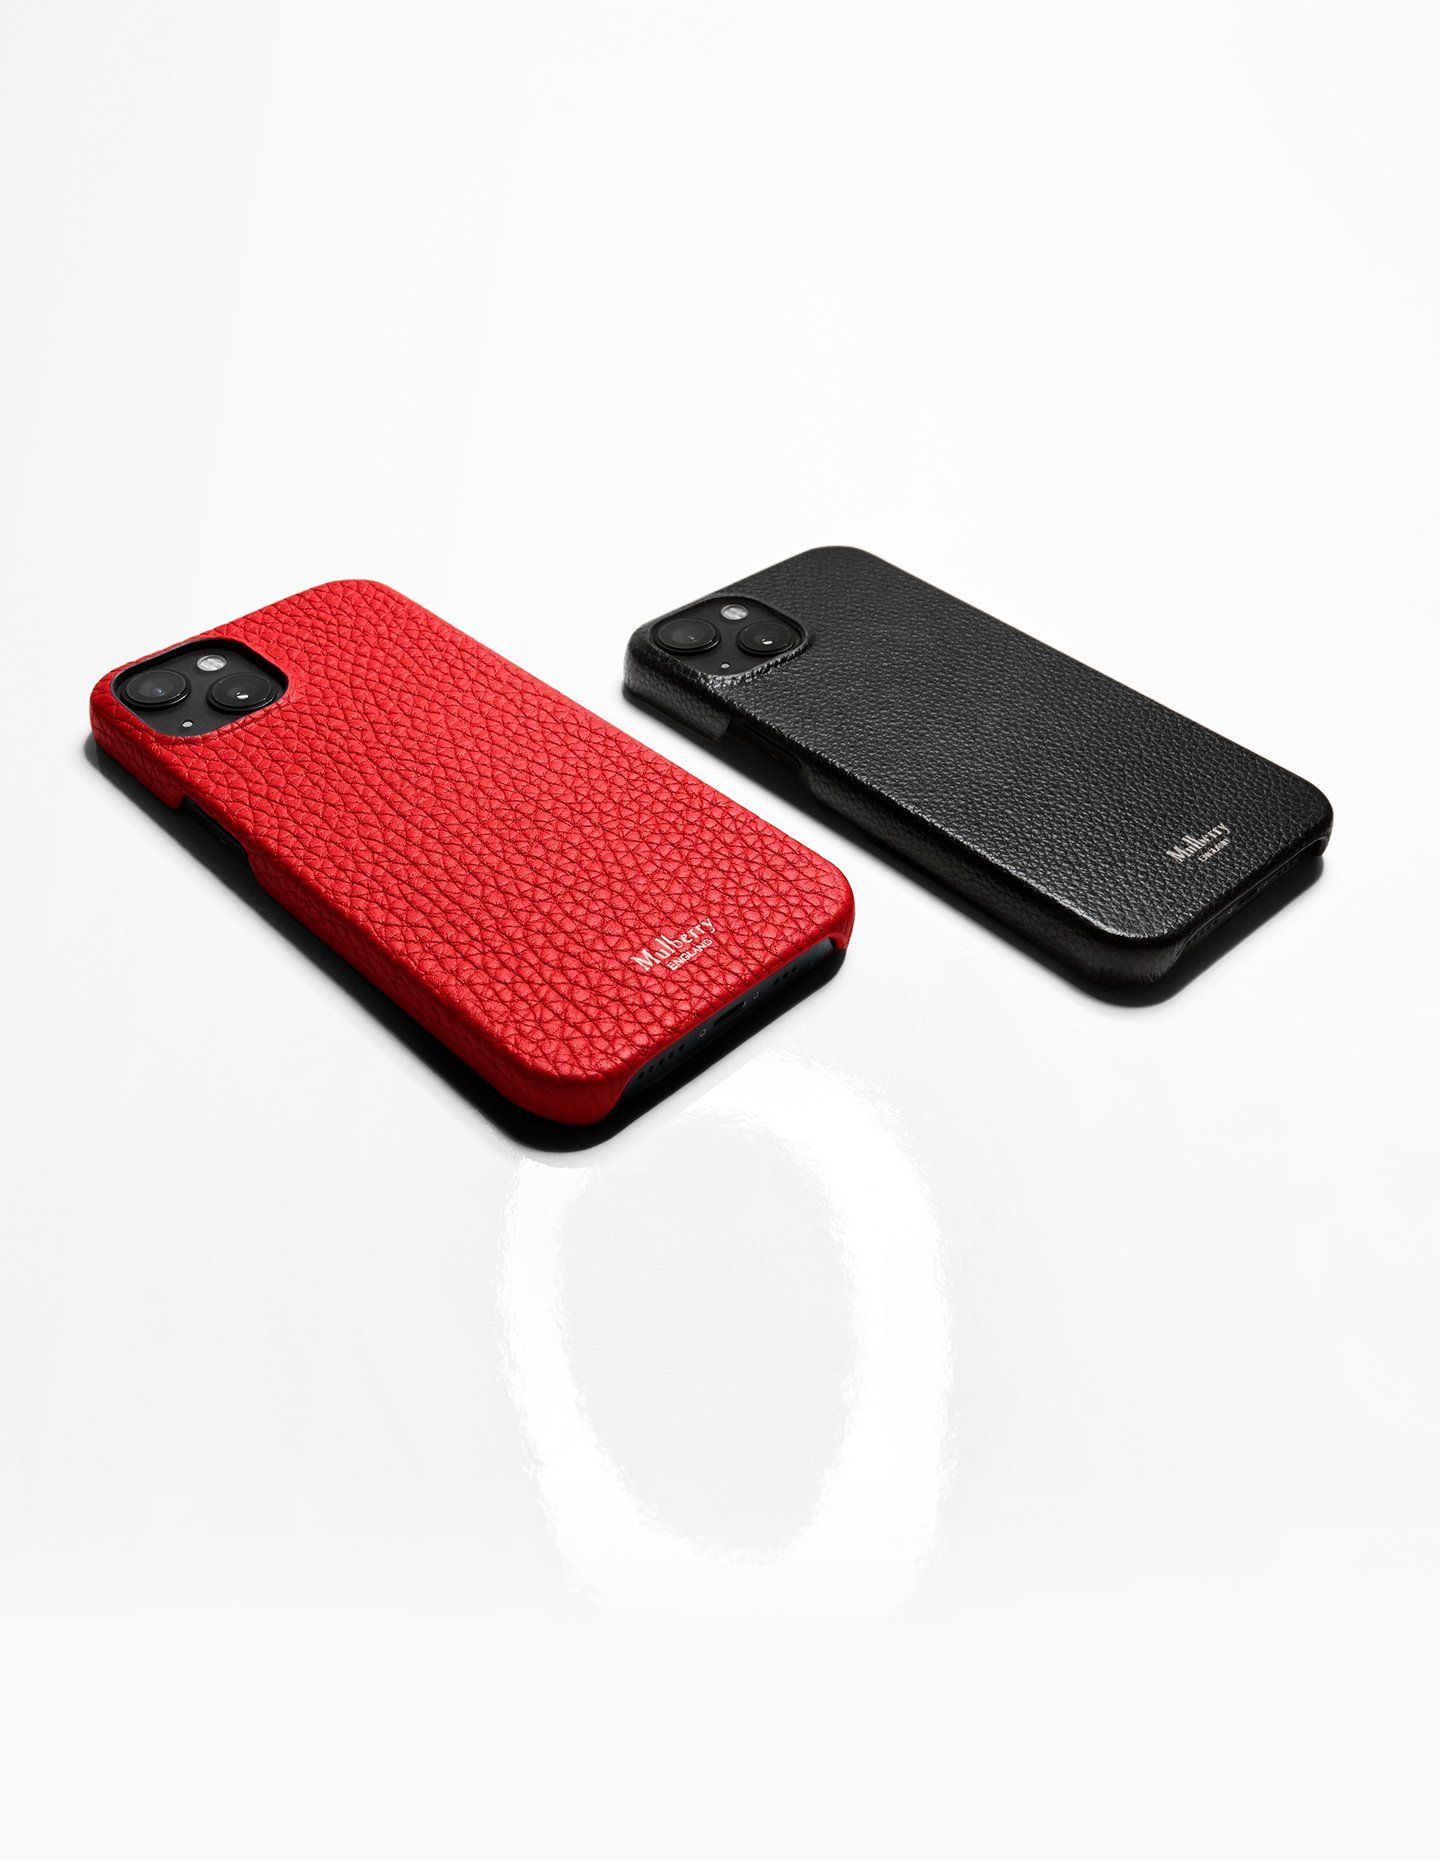 Two Mulberry iPhone cases in red and black